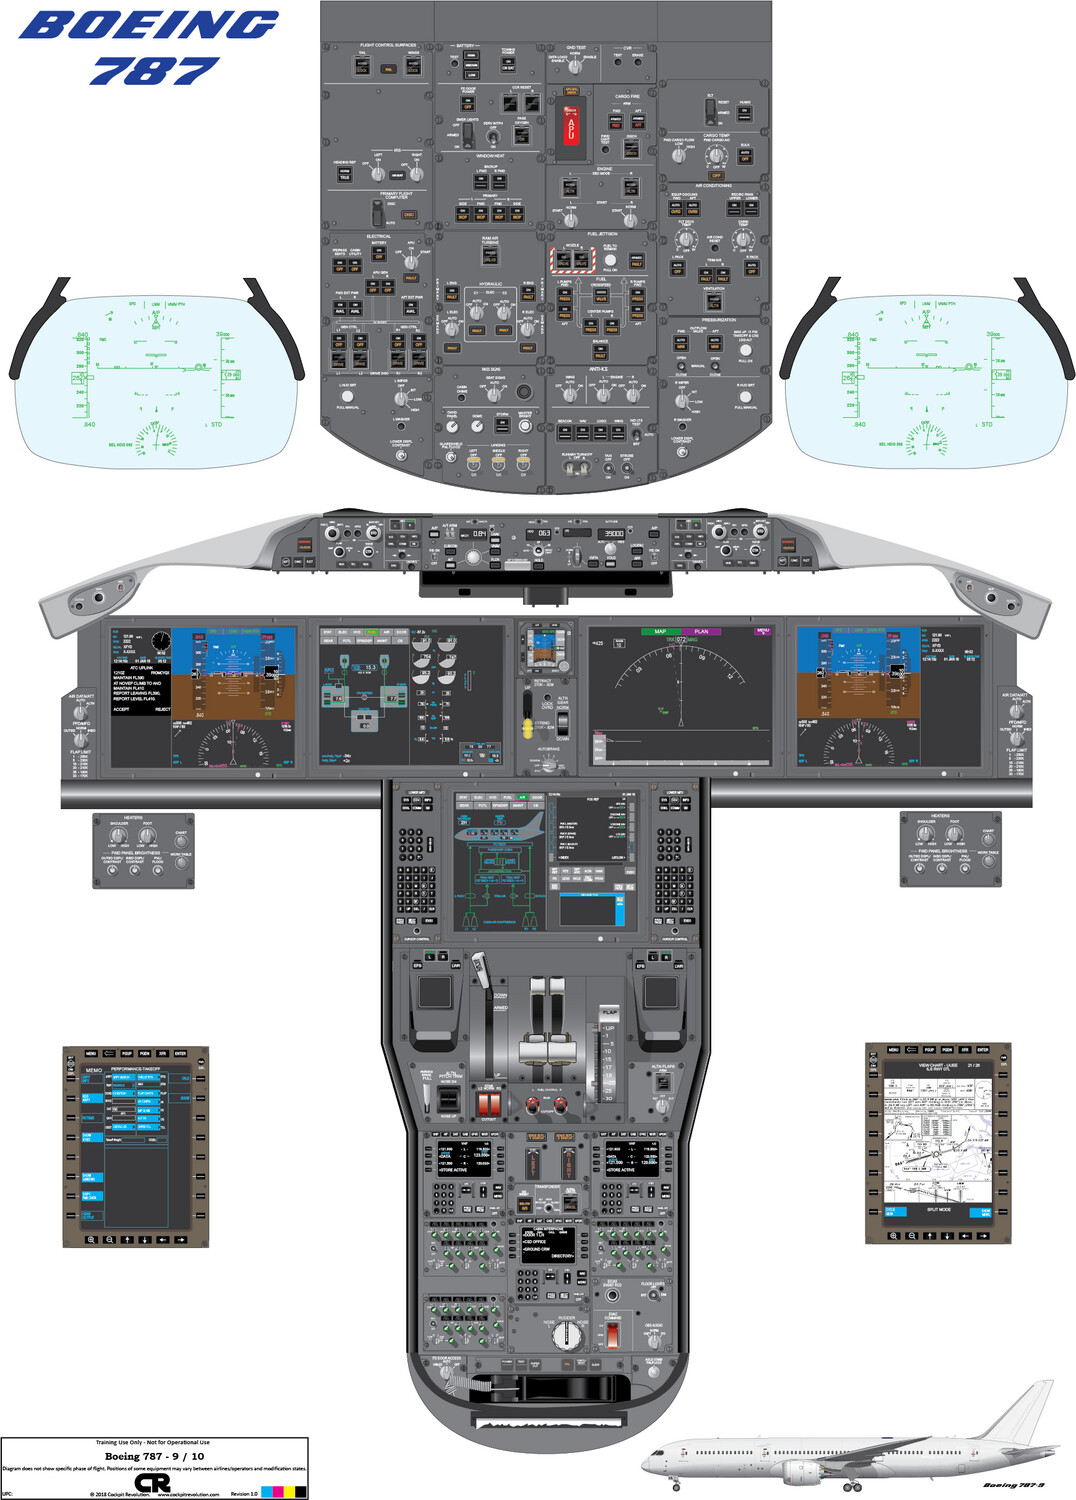 35%-100% Scale from £29.85 Boeing 787-9 Dreamliner Cockpit Training Posters 